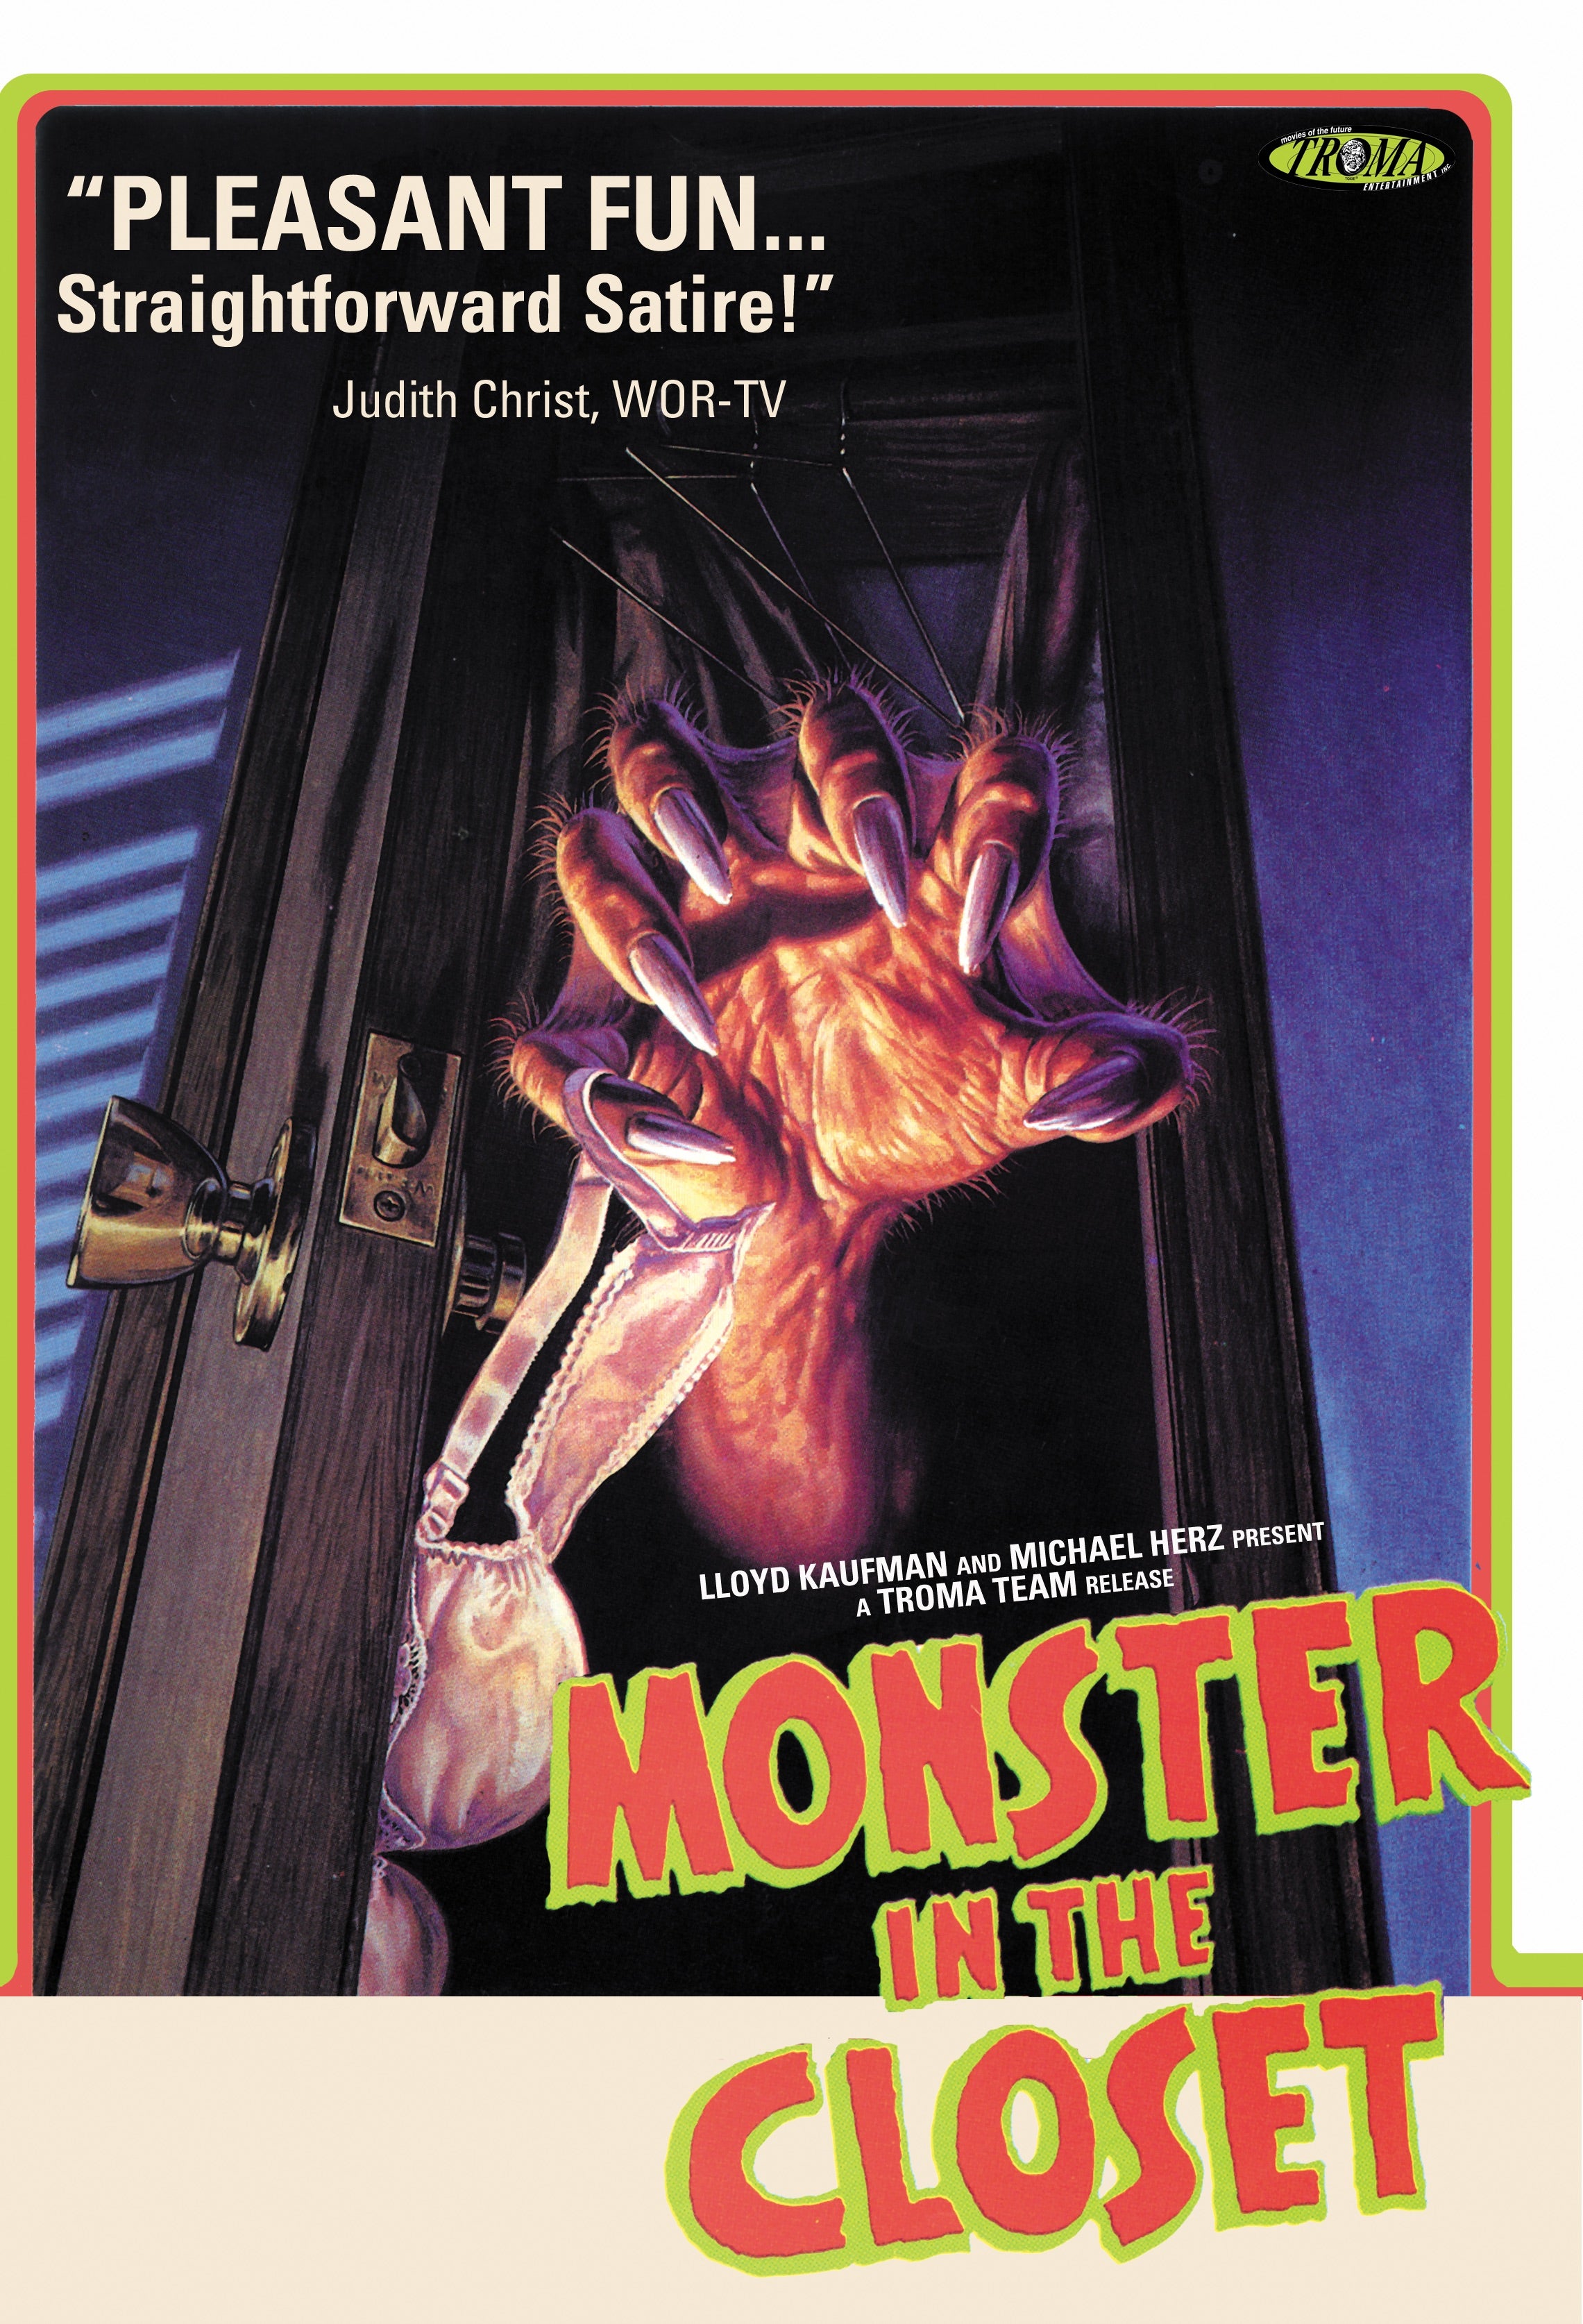 MONSTER IN THE CLOSET DVD